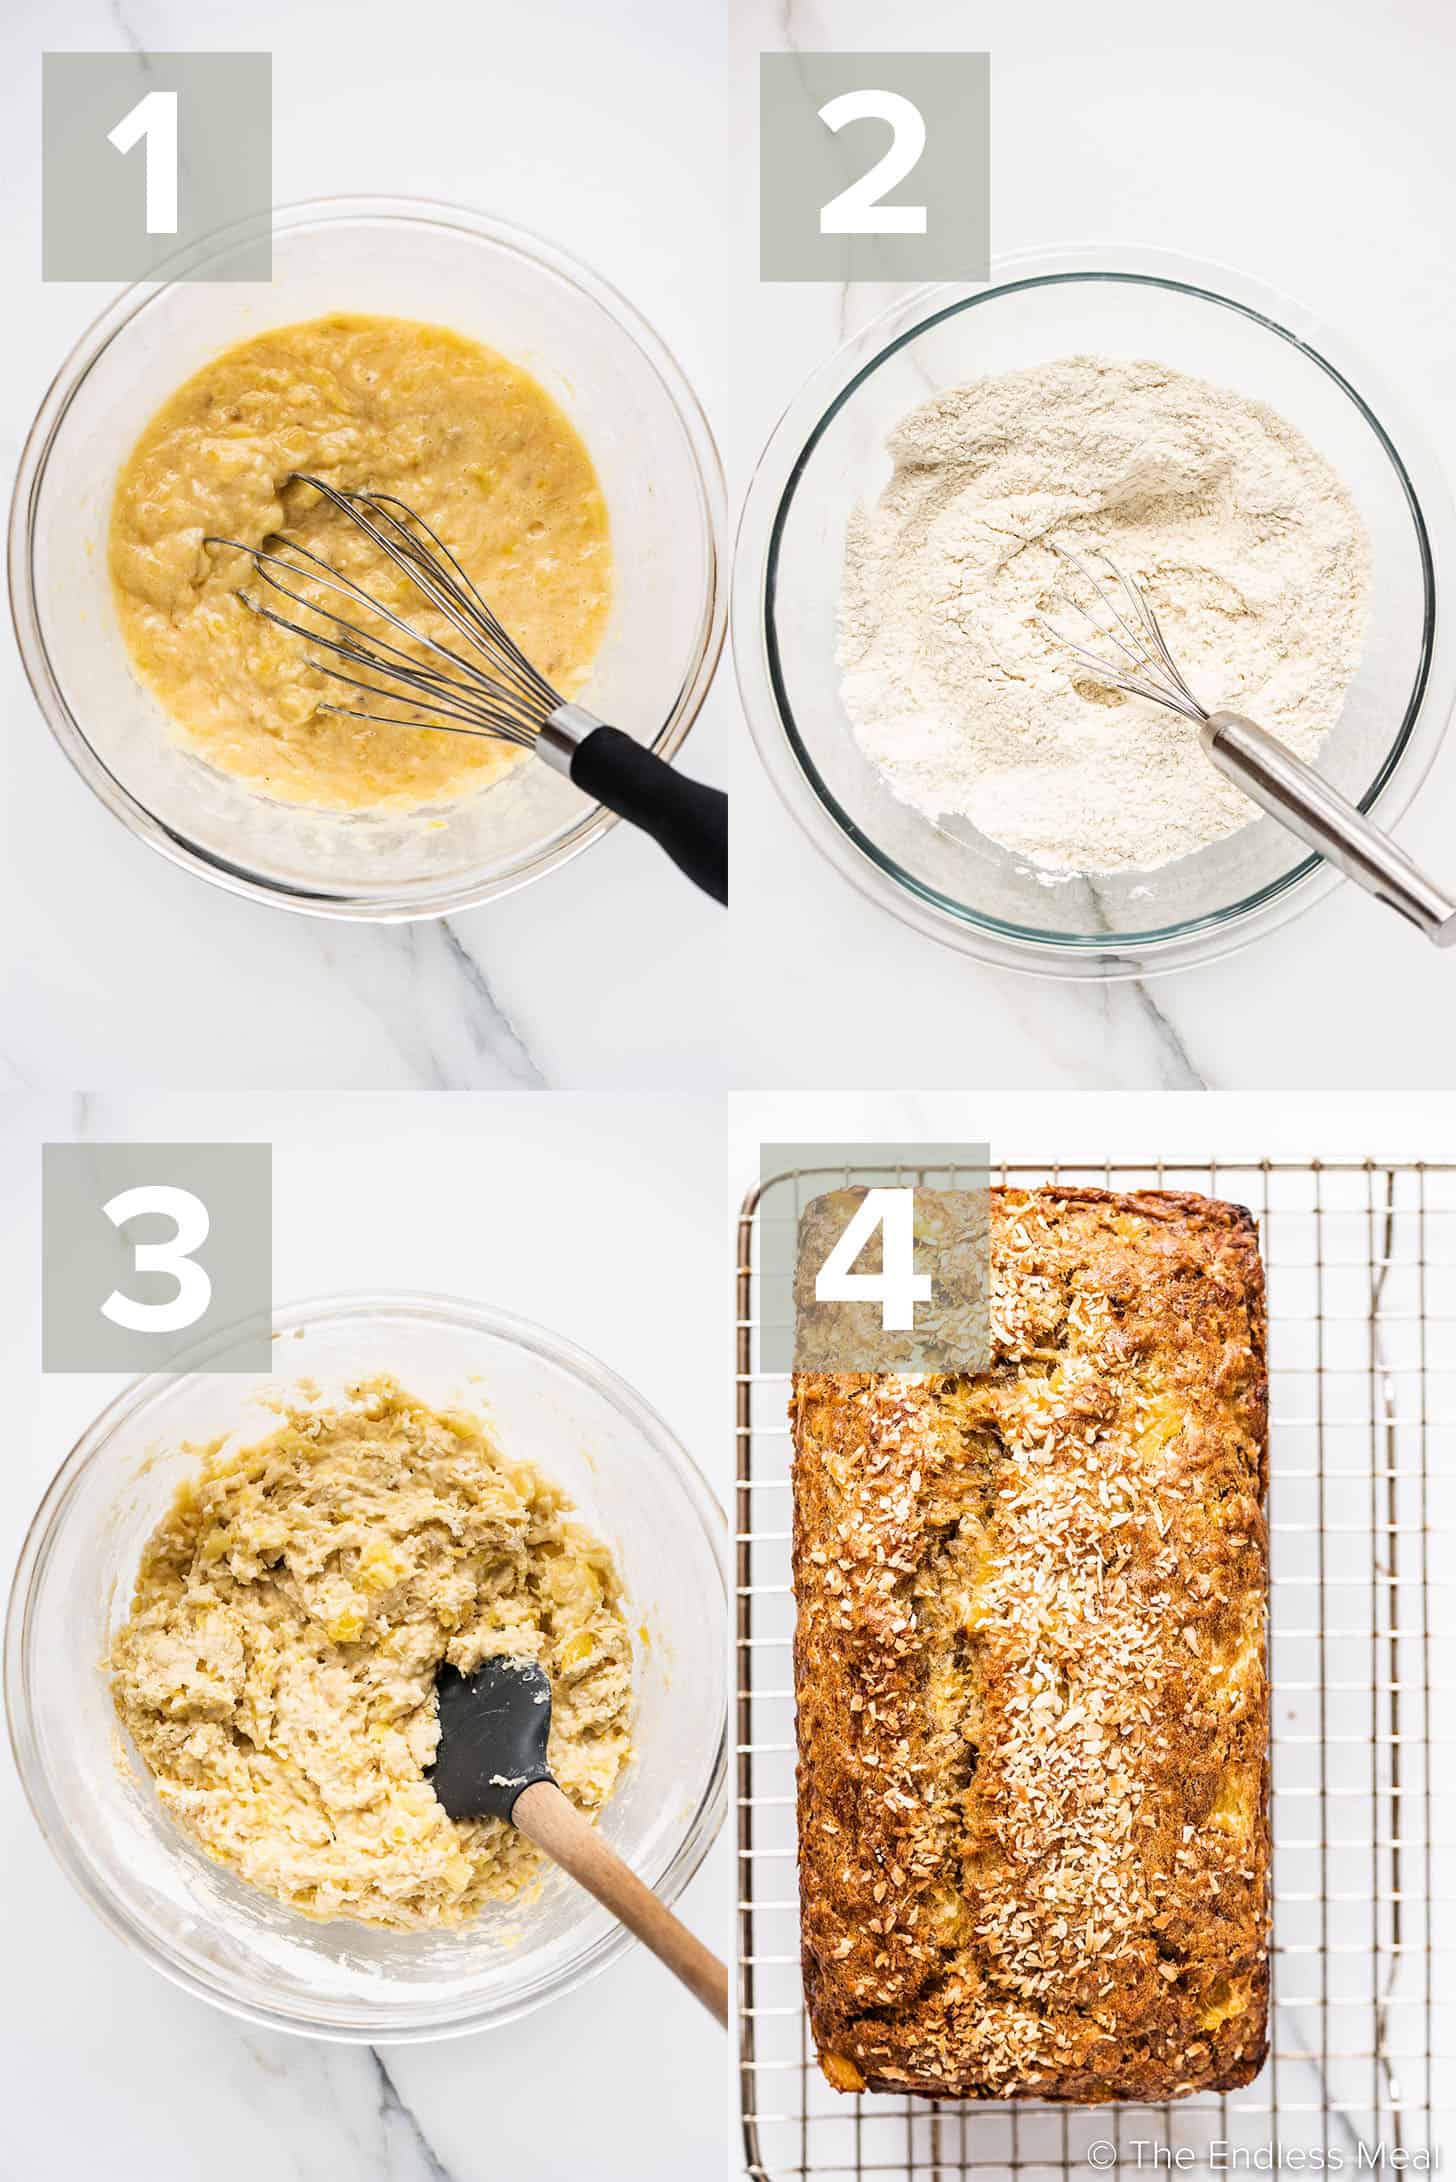 4 pictures showing how to make this Hawaiian Banana Bread Recipe